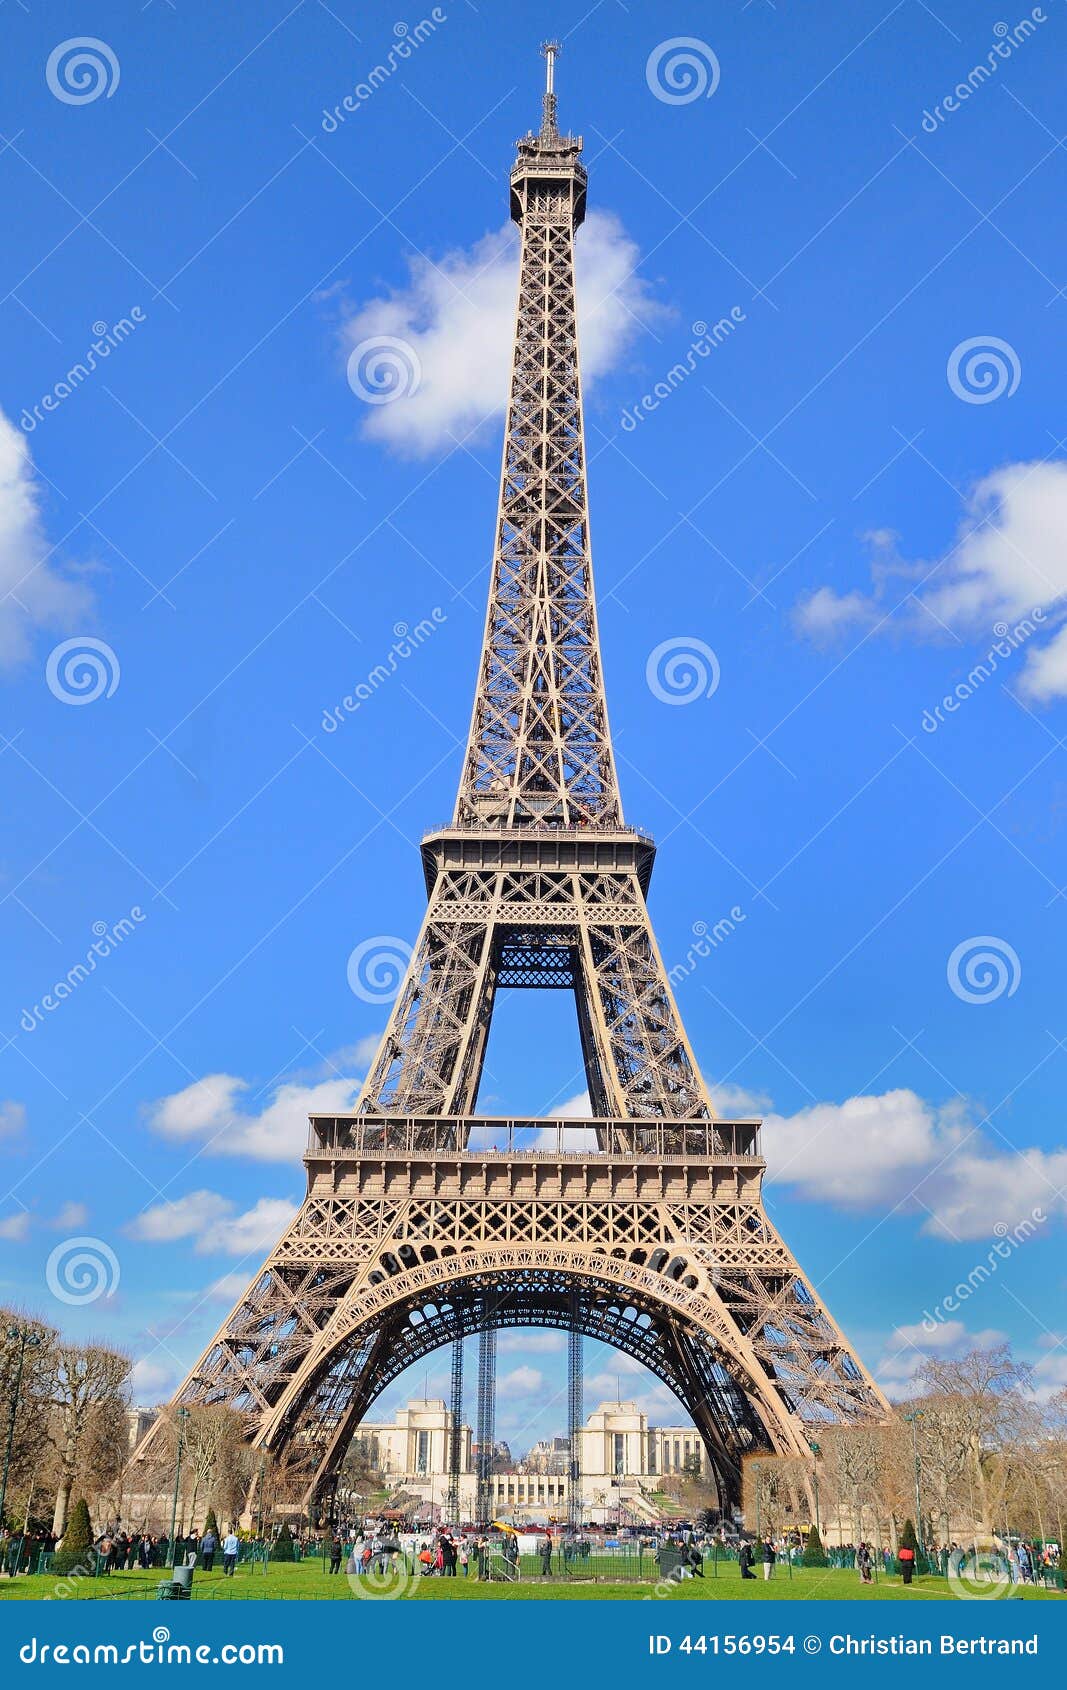 Tour Of The Eiffel Tower